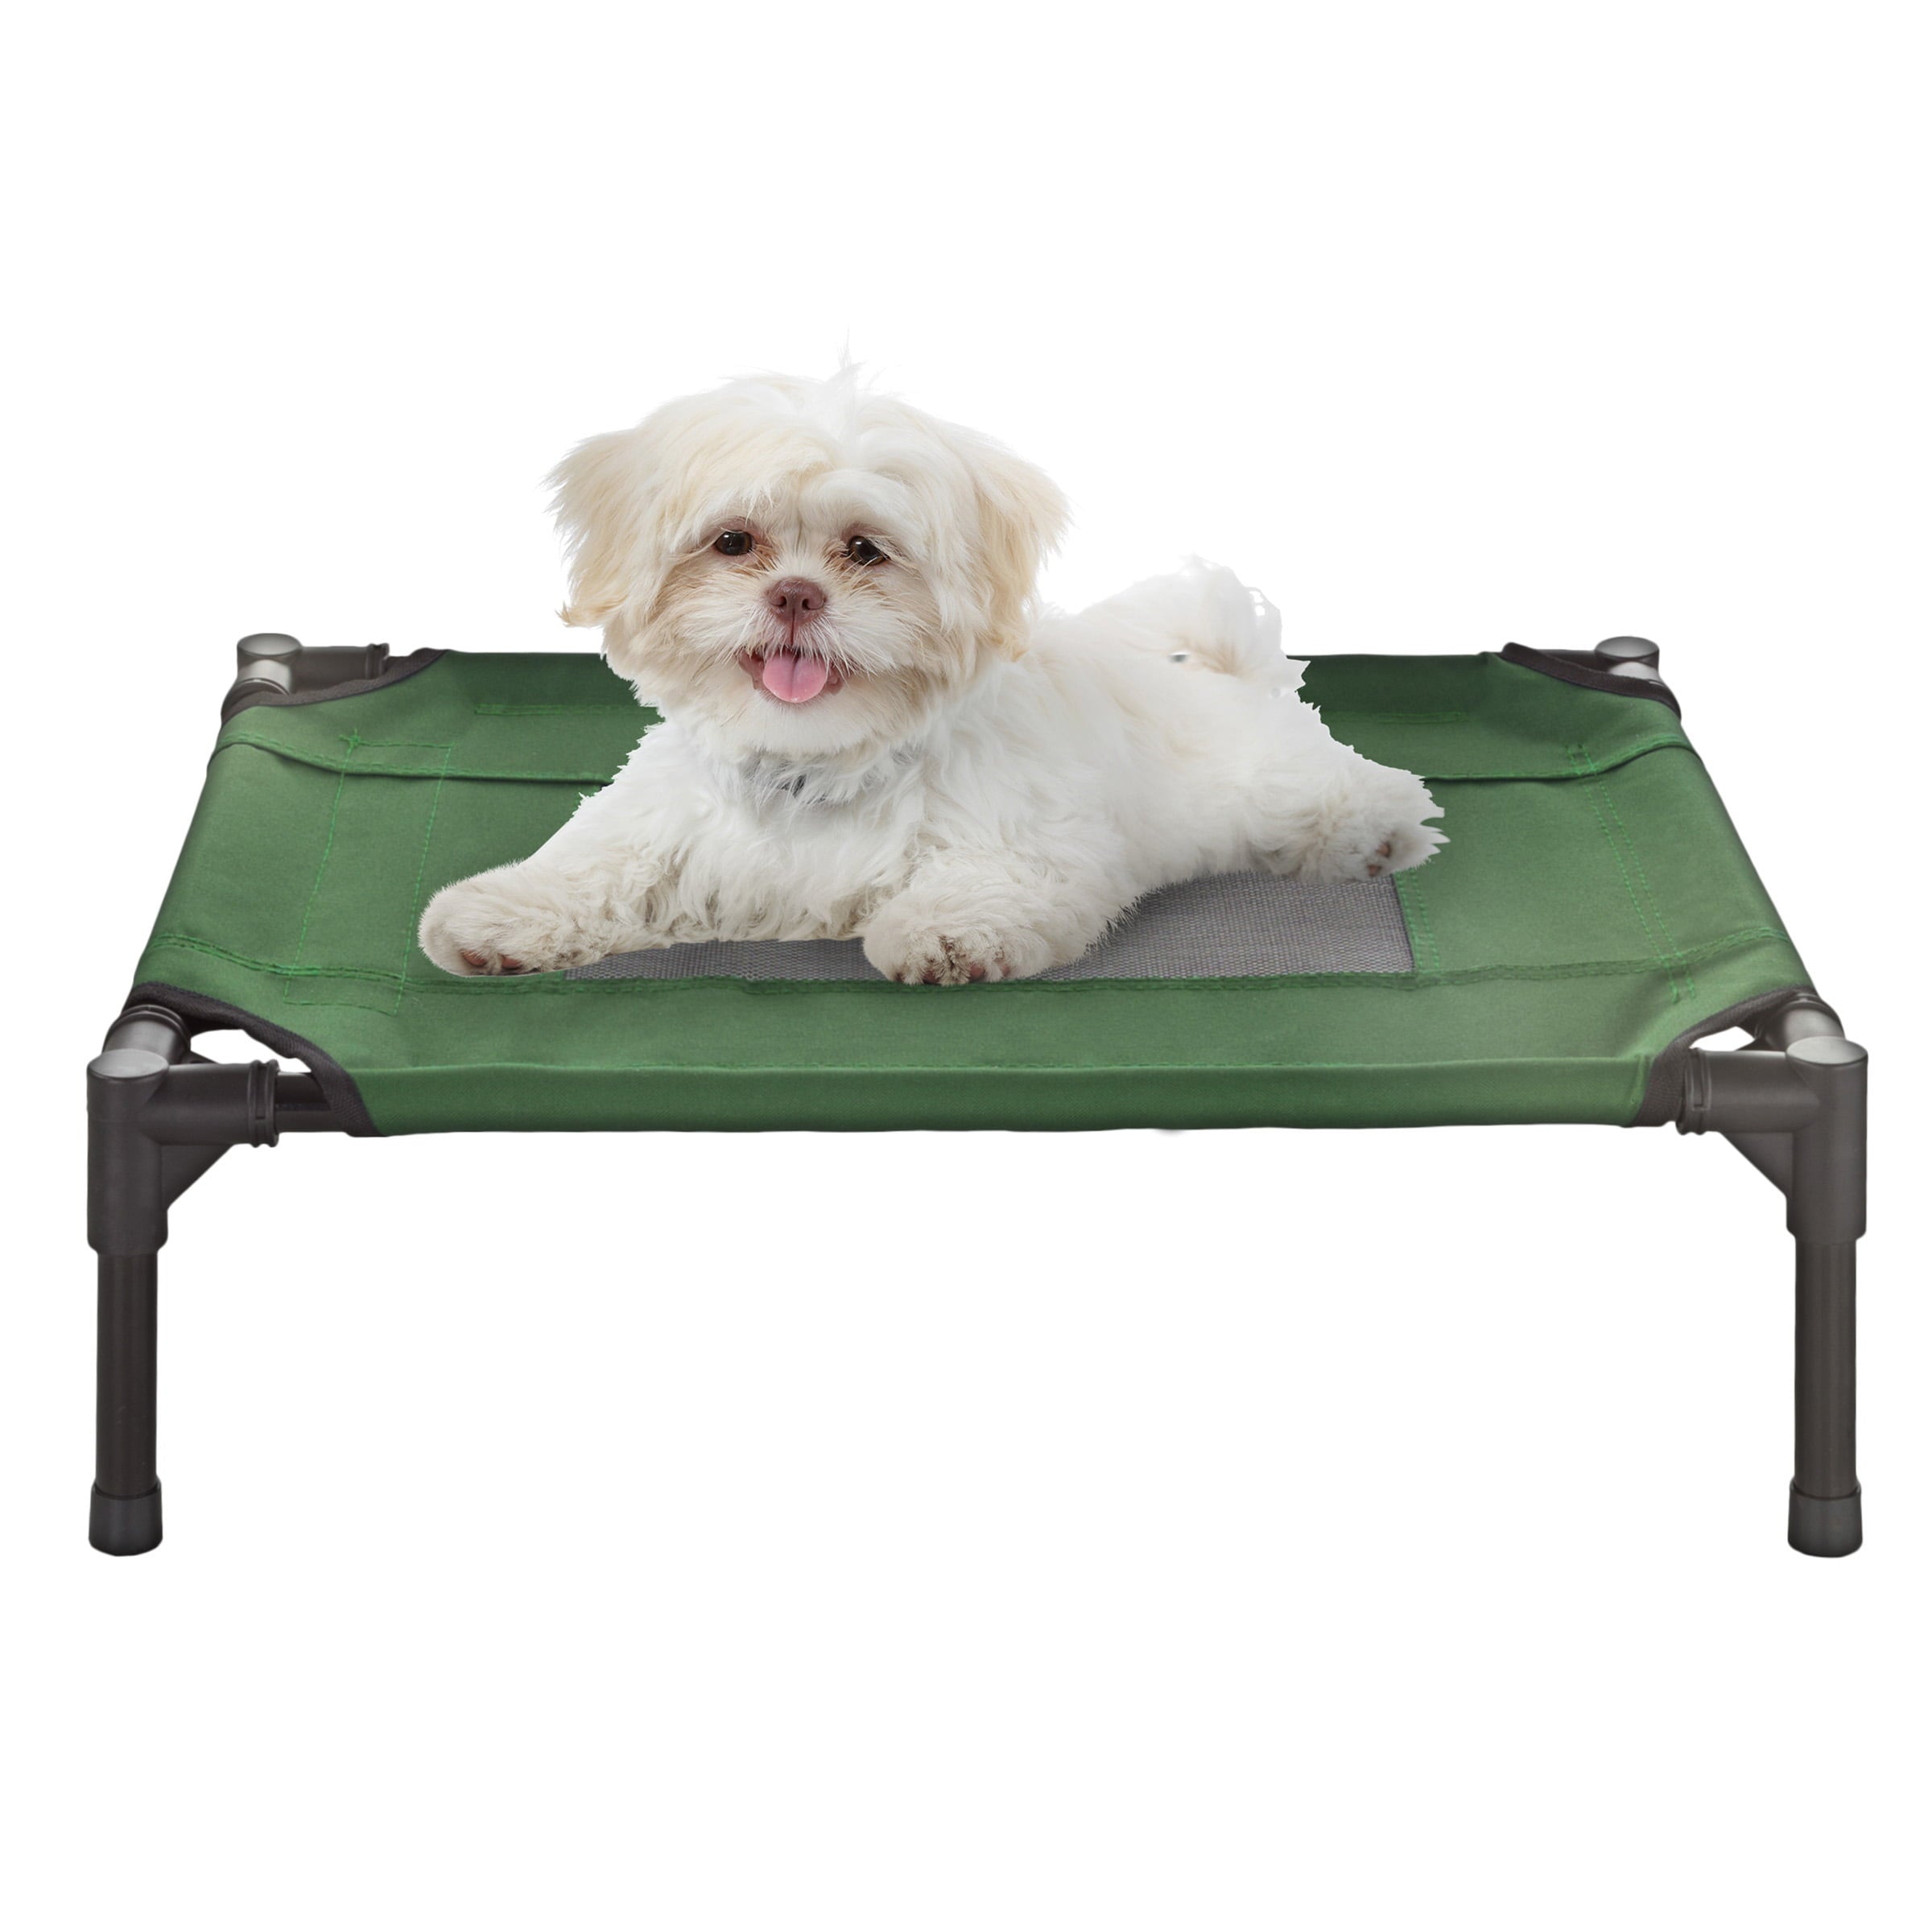 Elevated Dog Bed – 24.5x18.5 Portable Bed for Pets with Non-Slip Feet – Indoor/Outdoor Dog Cot or Puppy Bed for Pets up to 25lbs by Petmaker (Green)